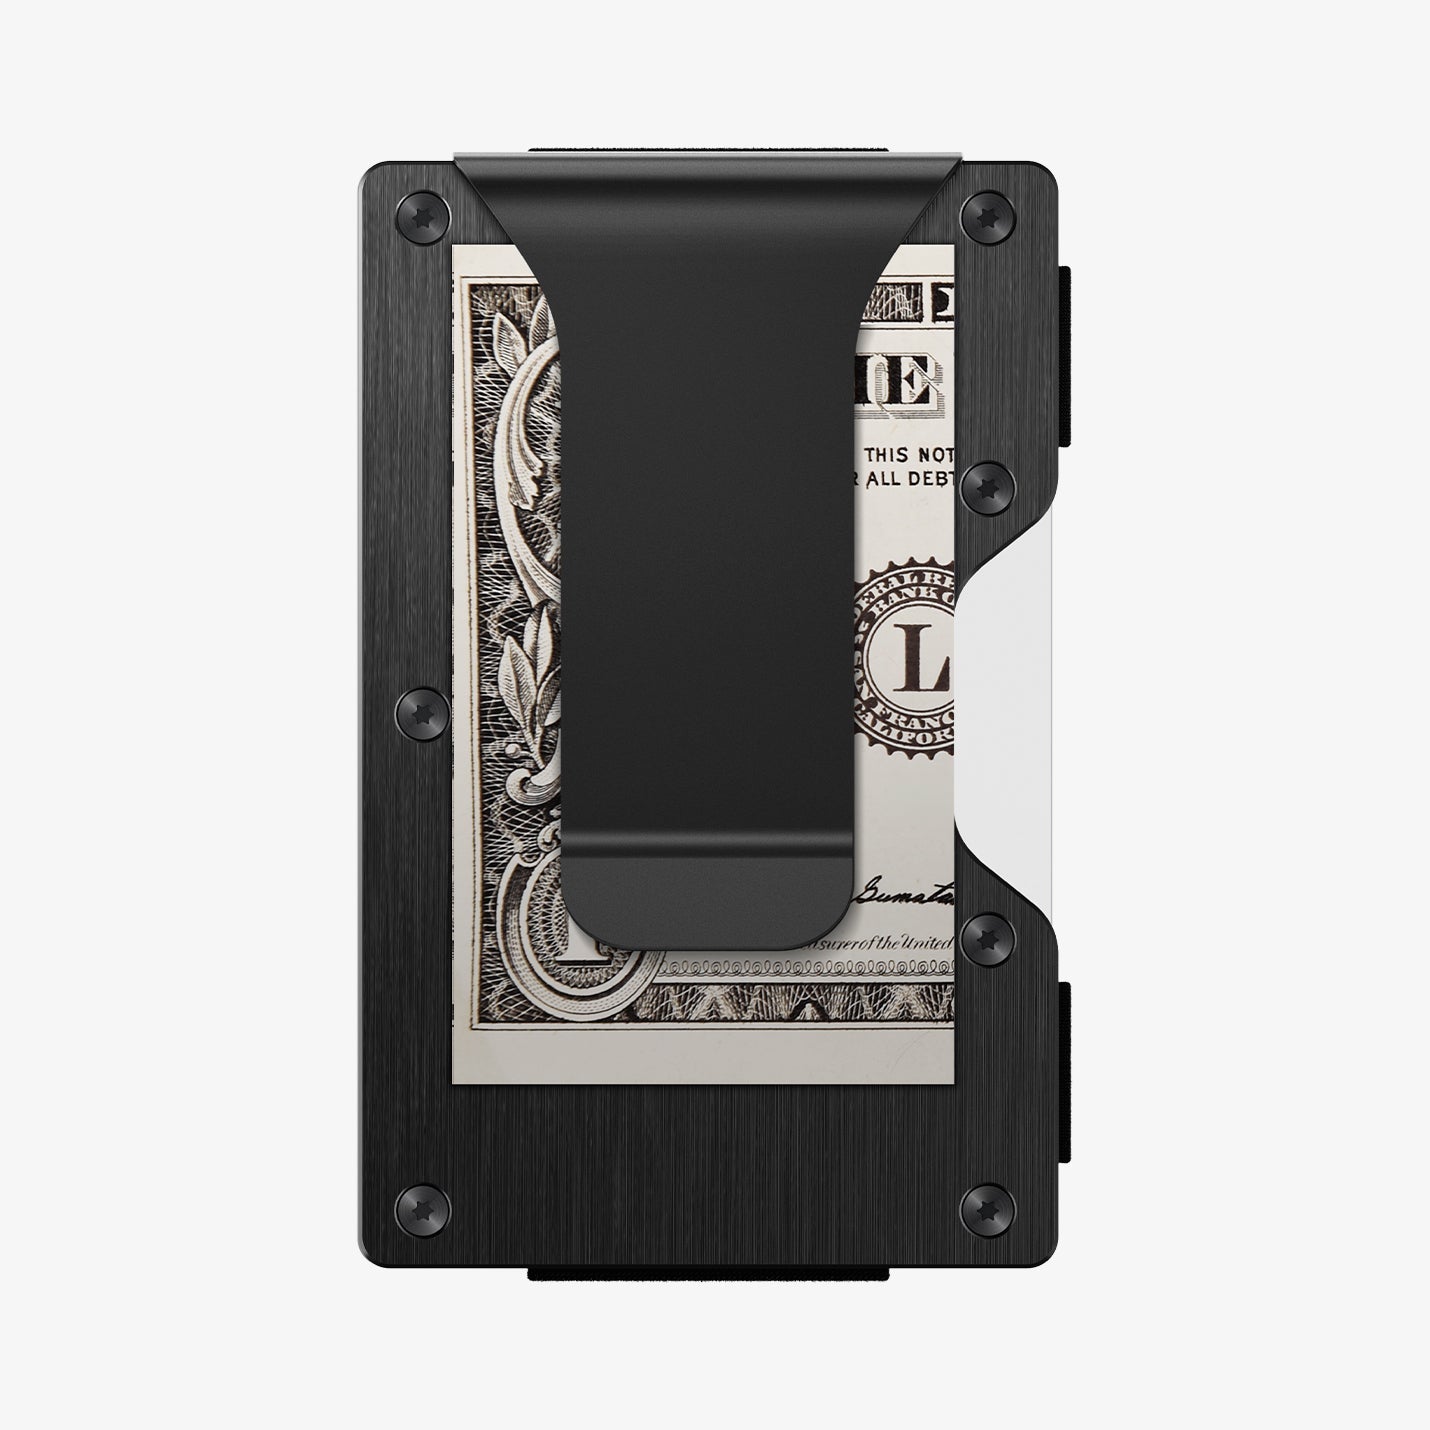 AFA05261 - Card Holder Wallet S Money Clip in black showing the back with money in clip